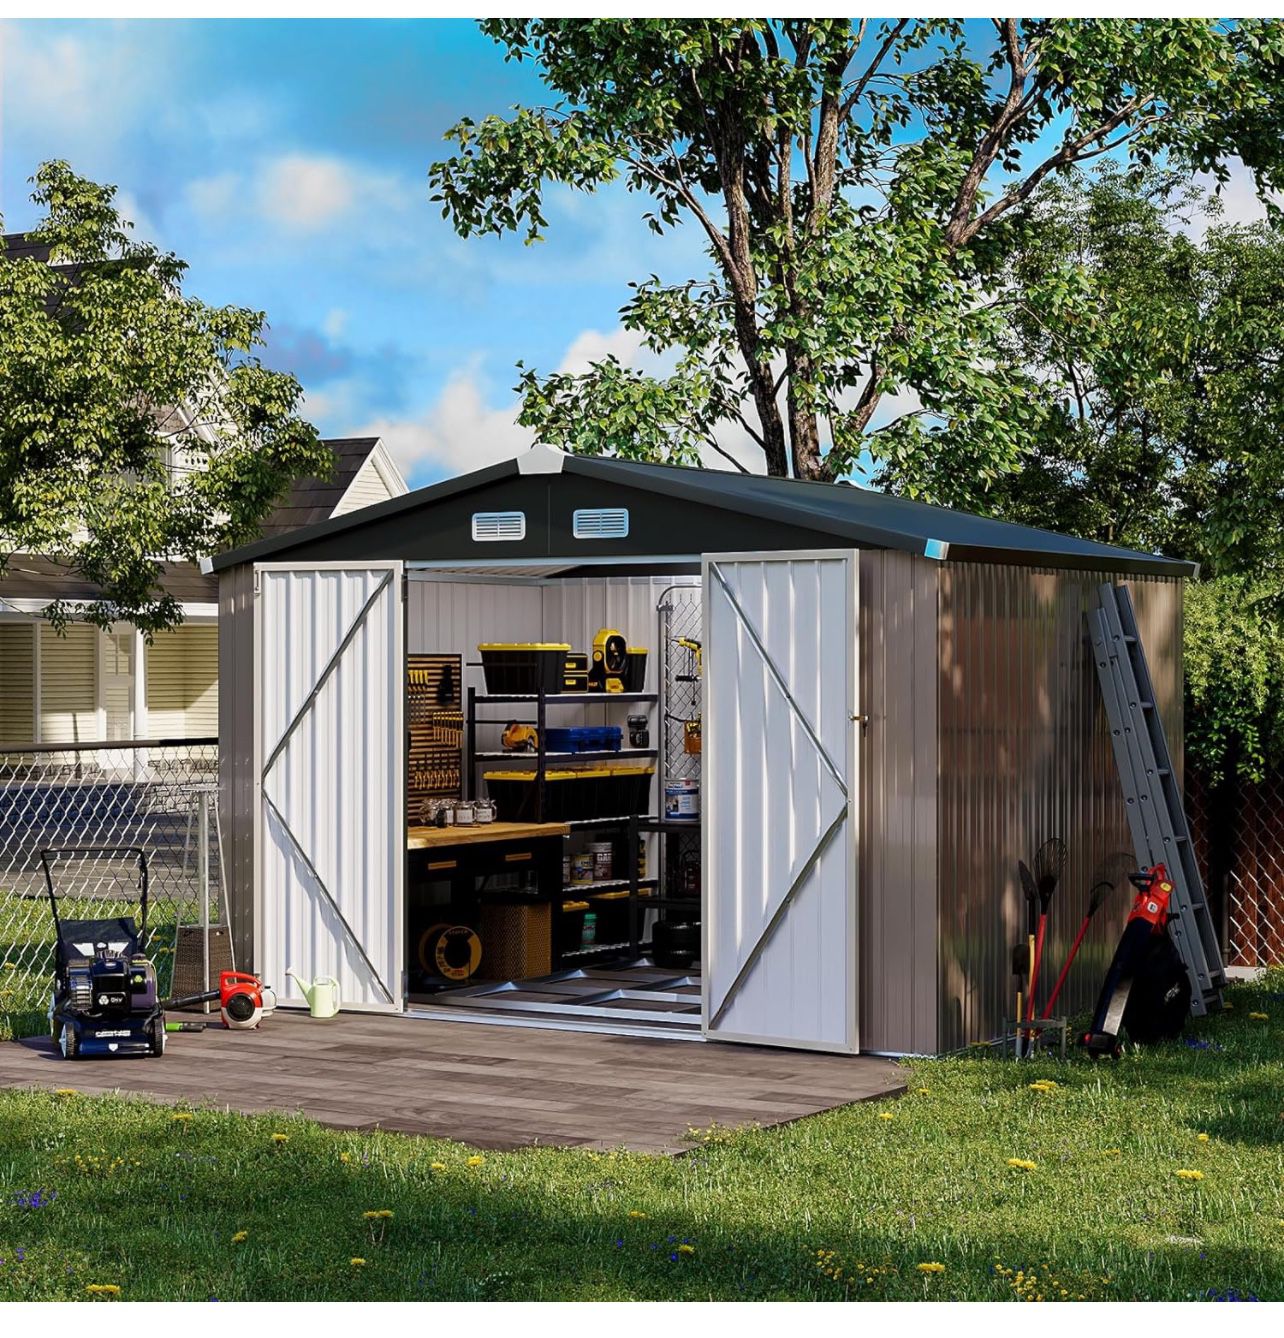 7.6’x9.7’ Outdoor Storage Shed with Base, Outdoor Tool Storage Shed, Outside Lawn Mower Storage, Garden Metal Shed for Bike,Sheds & Outdoor Storage wi